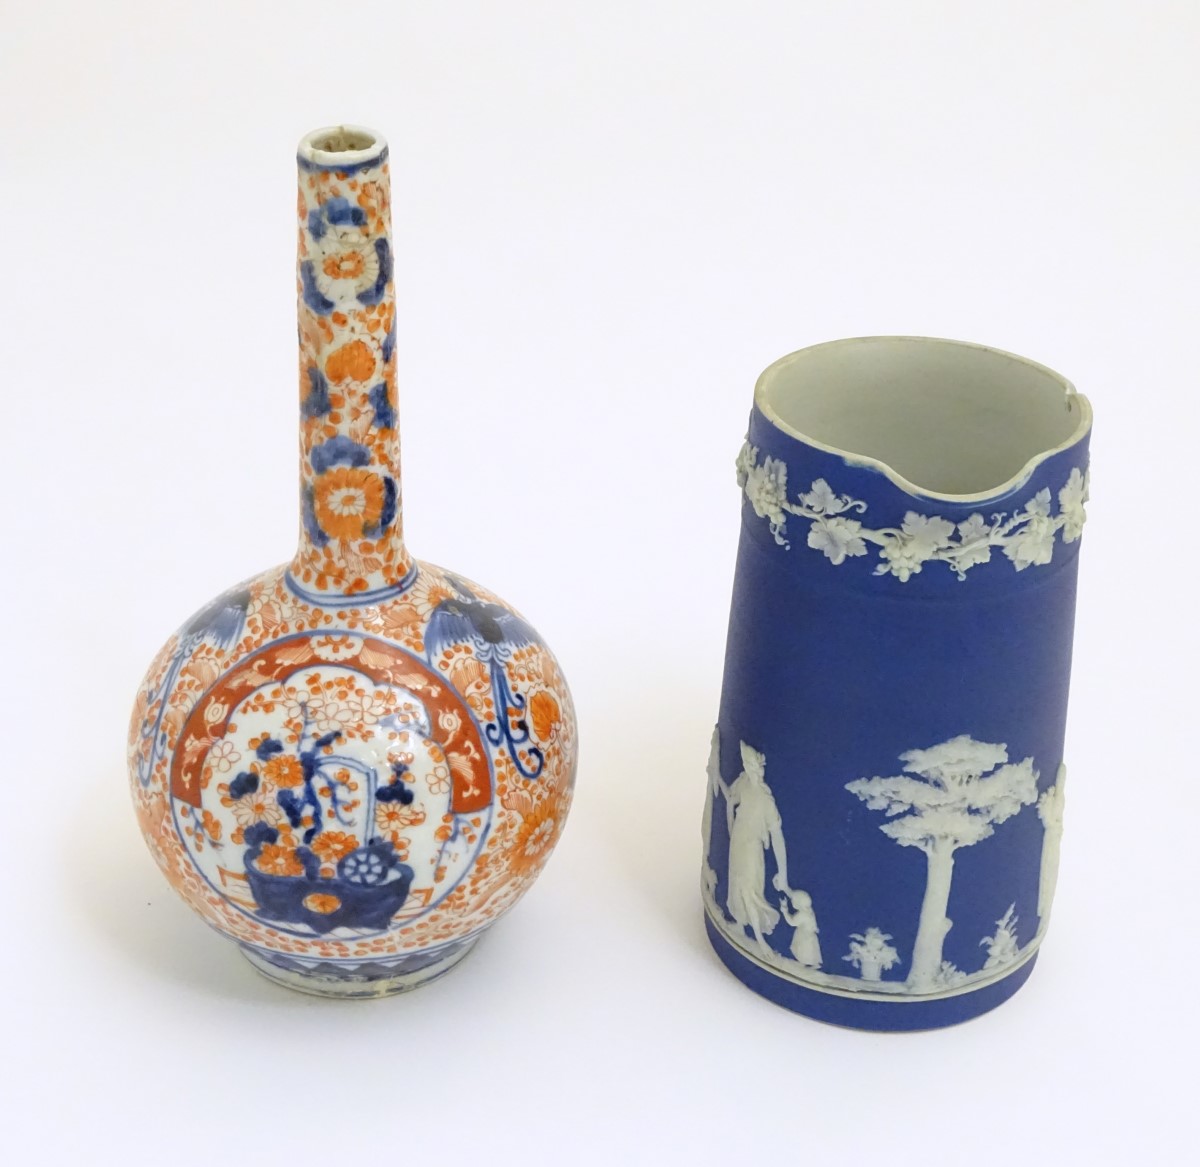 An Imari globular shaped vase with a long neck decorated with birds and flowers, approx. - Image 5 of 5